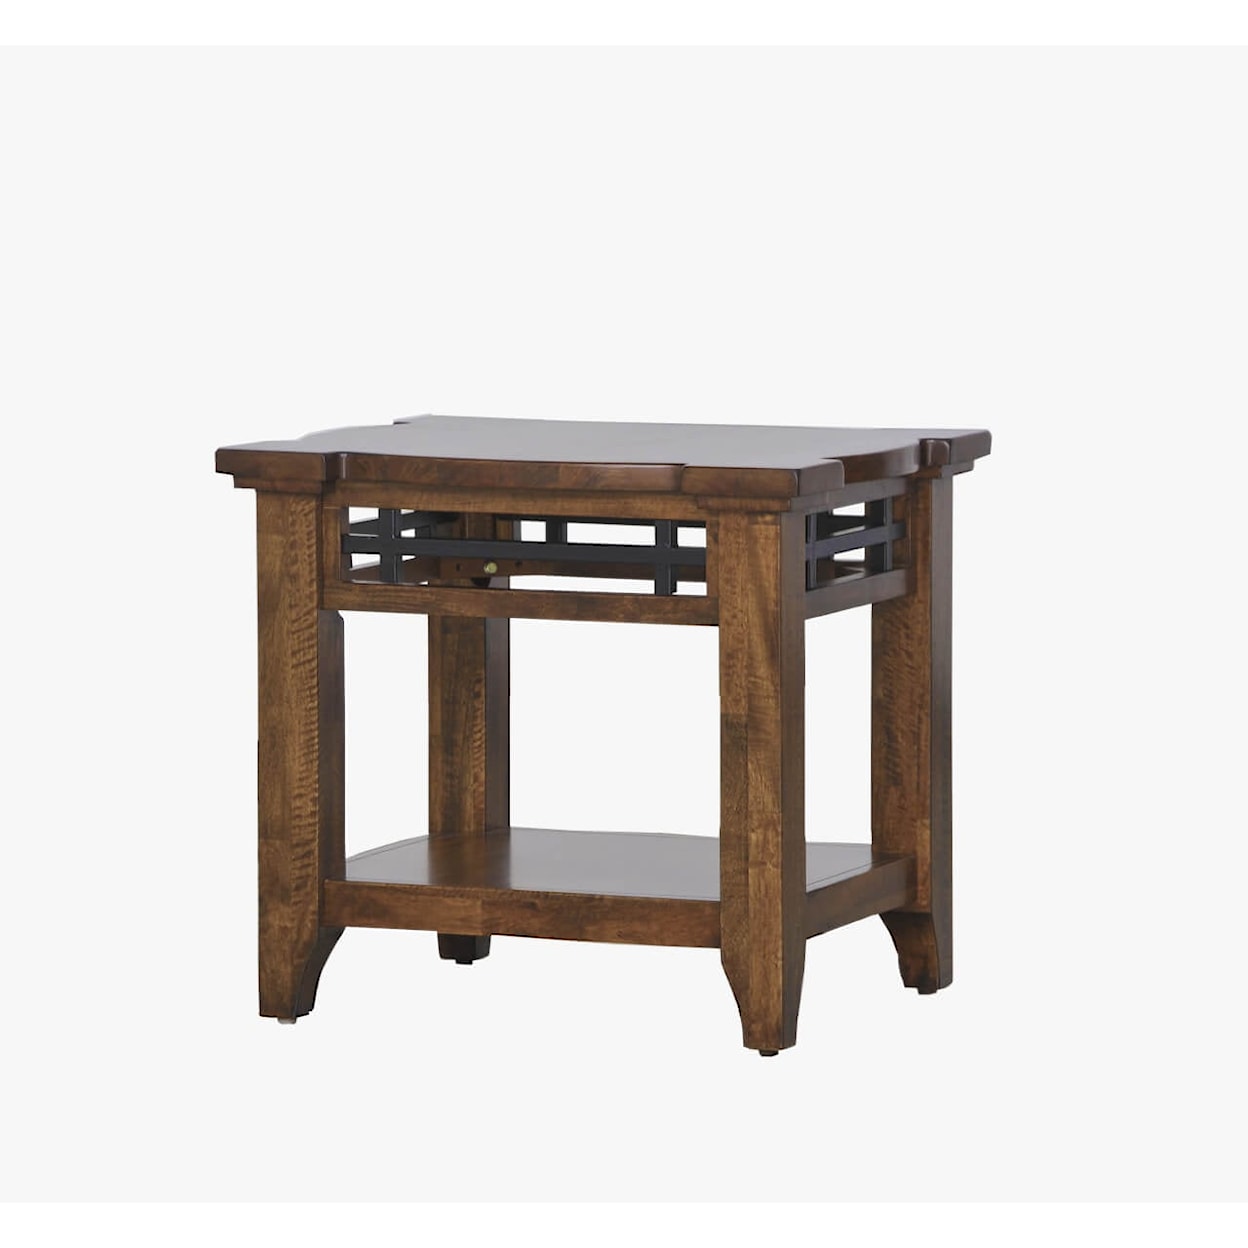 Warehouse M Whistler Retreat Chairside Table